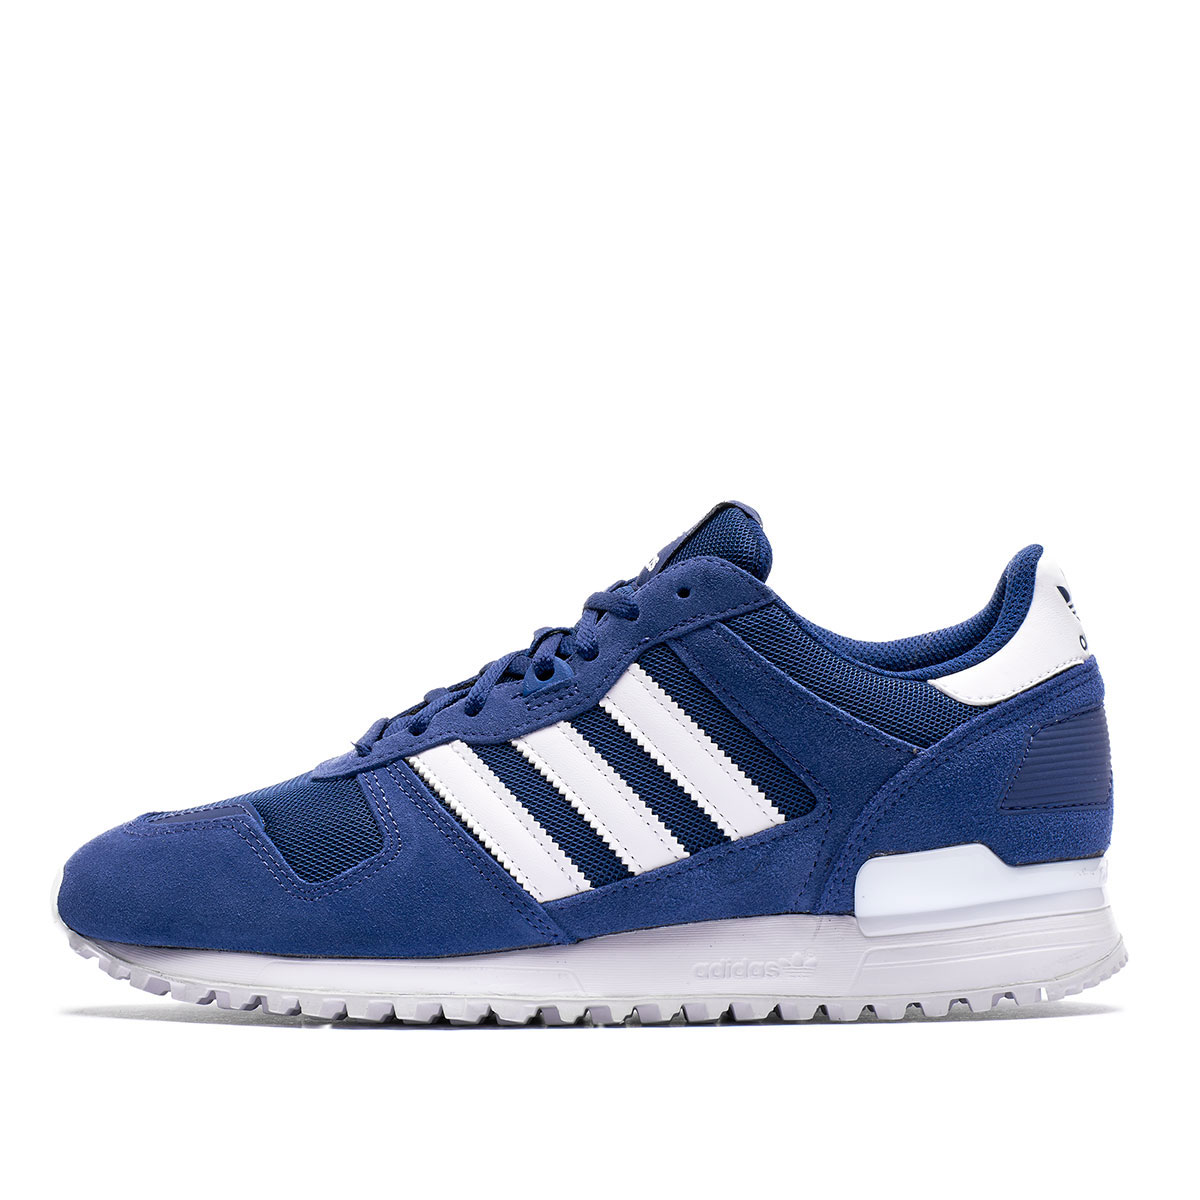 adidas ZX 700  BY9267